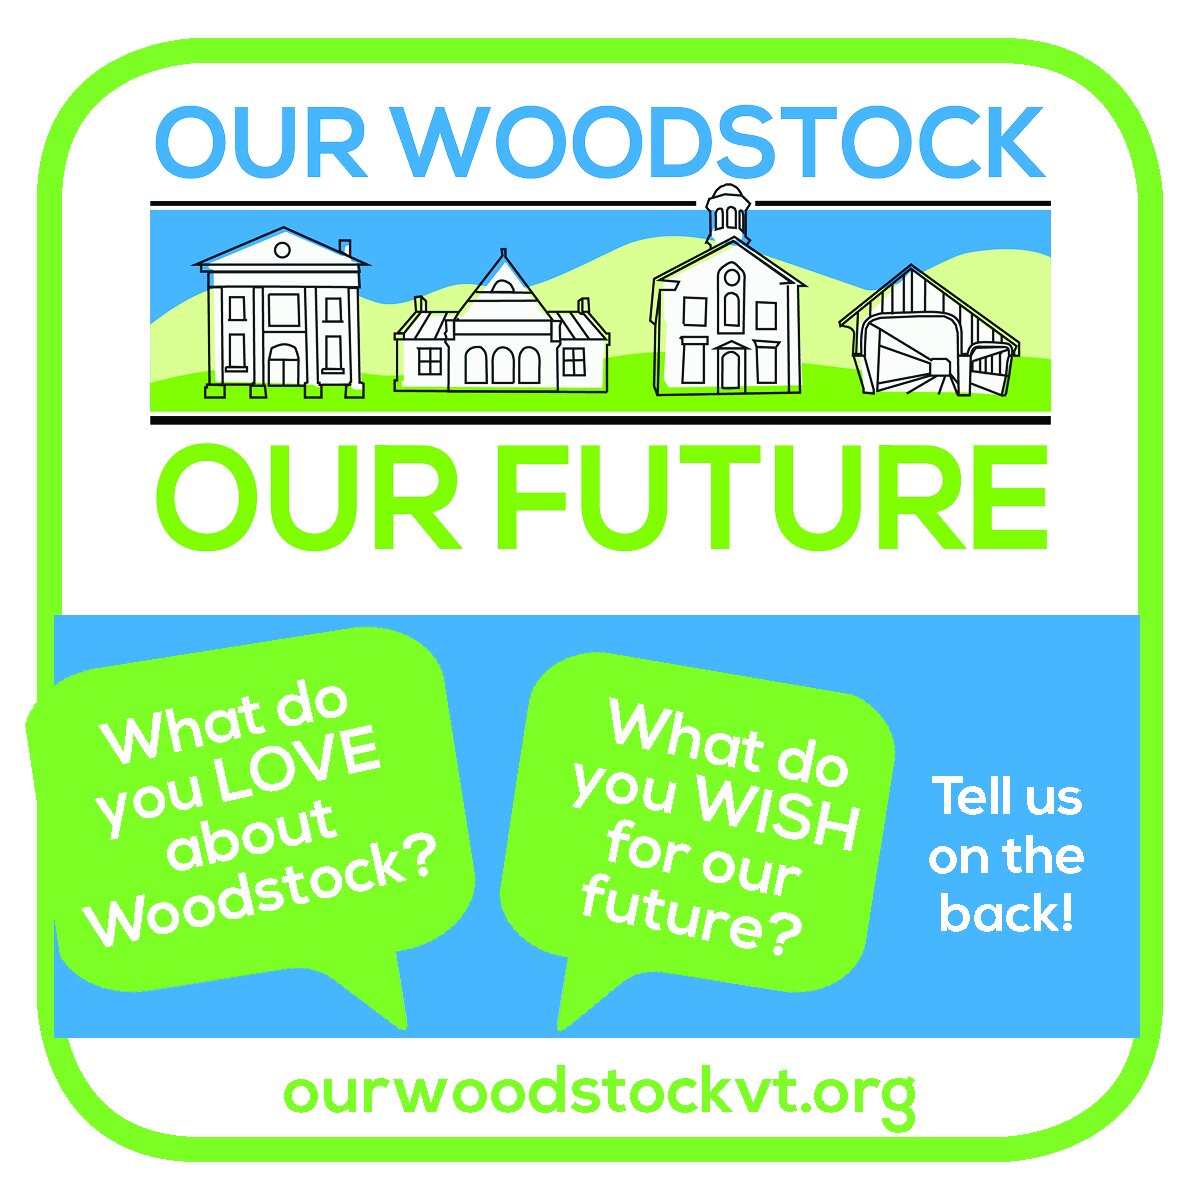 Our Woodstock, Our Future (Woodstock, VT)